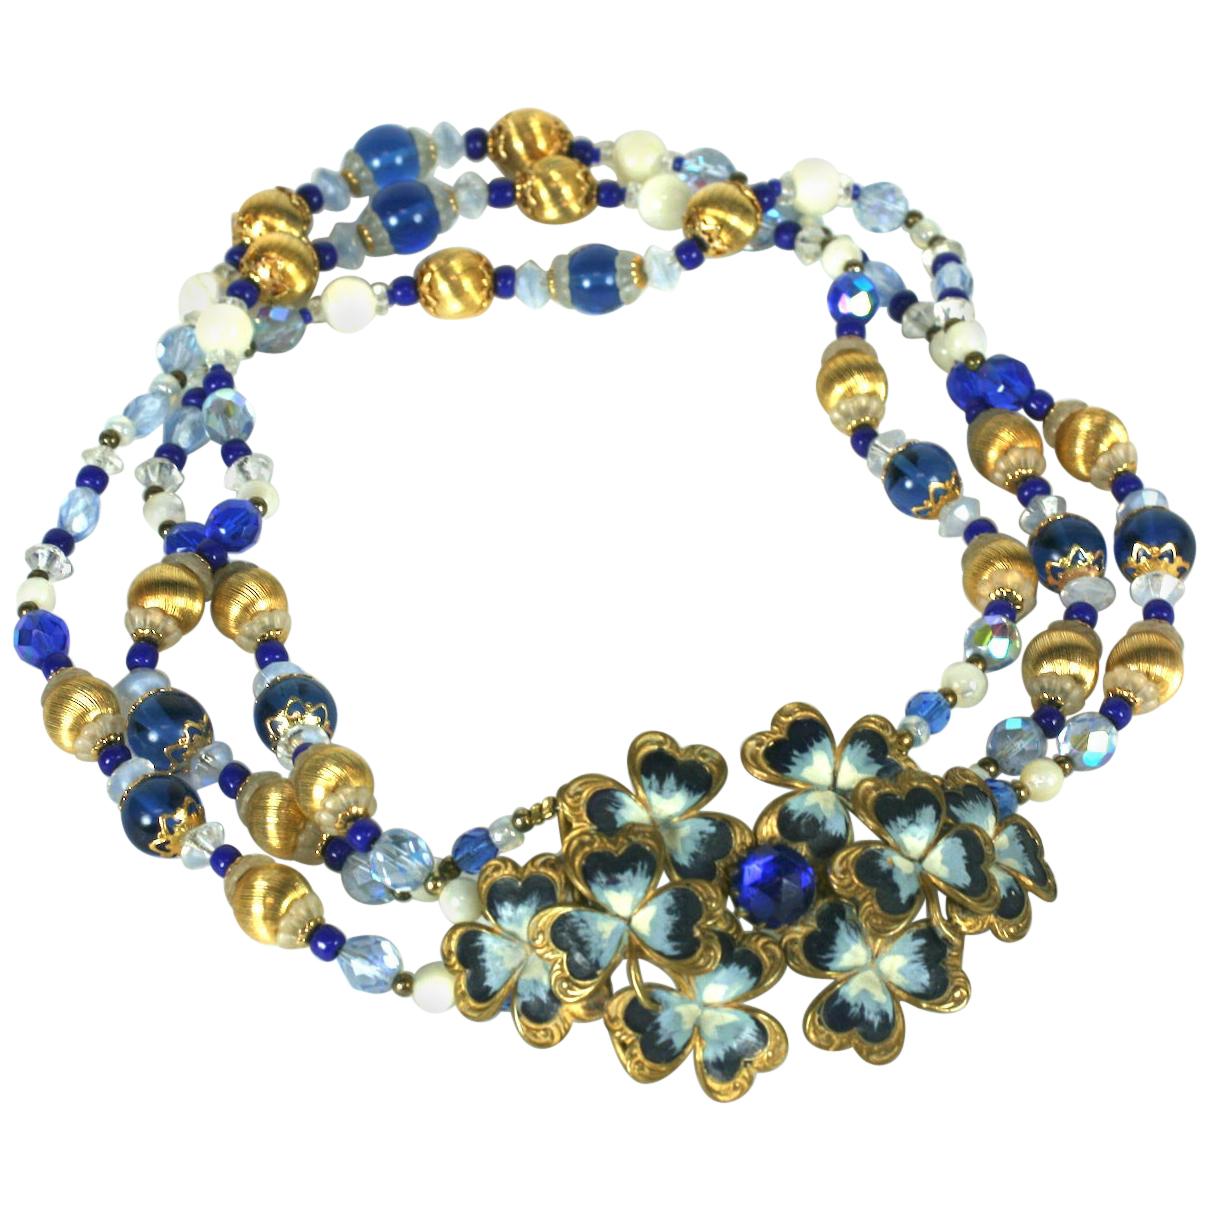 Attractive Beaded Necklace with Victorian Enamel Buckle